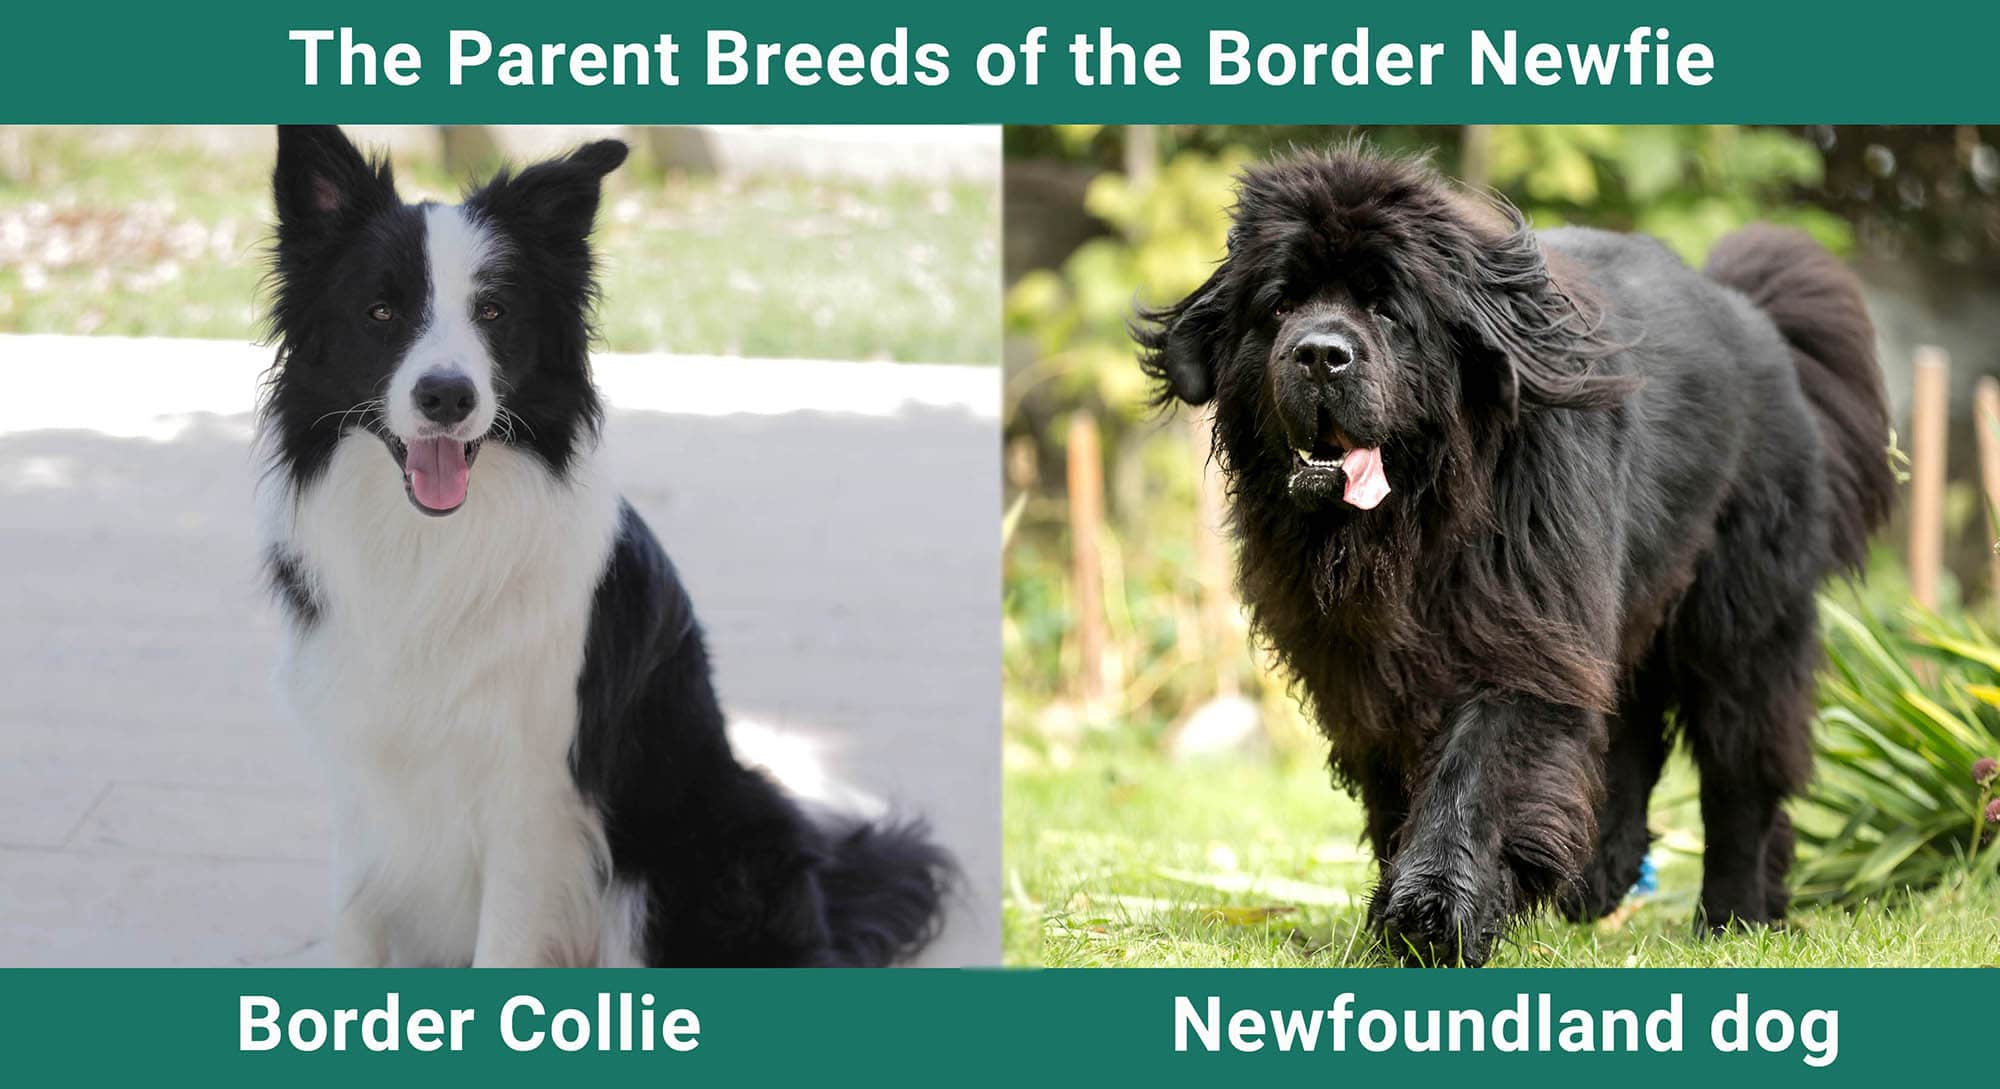 The Parent Breeds of the Border Newfie